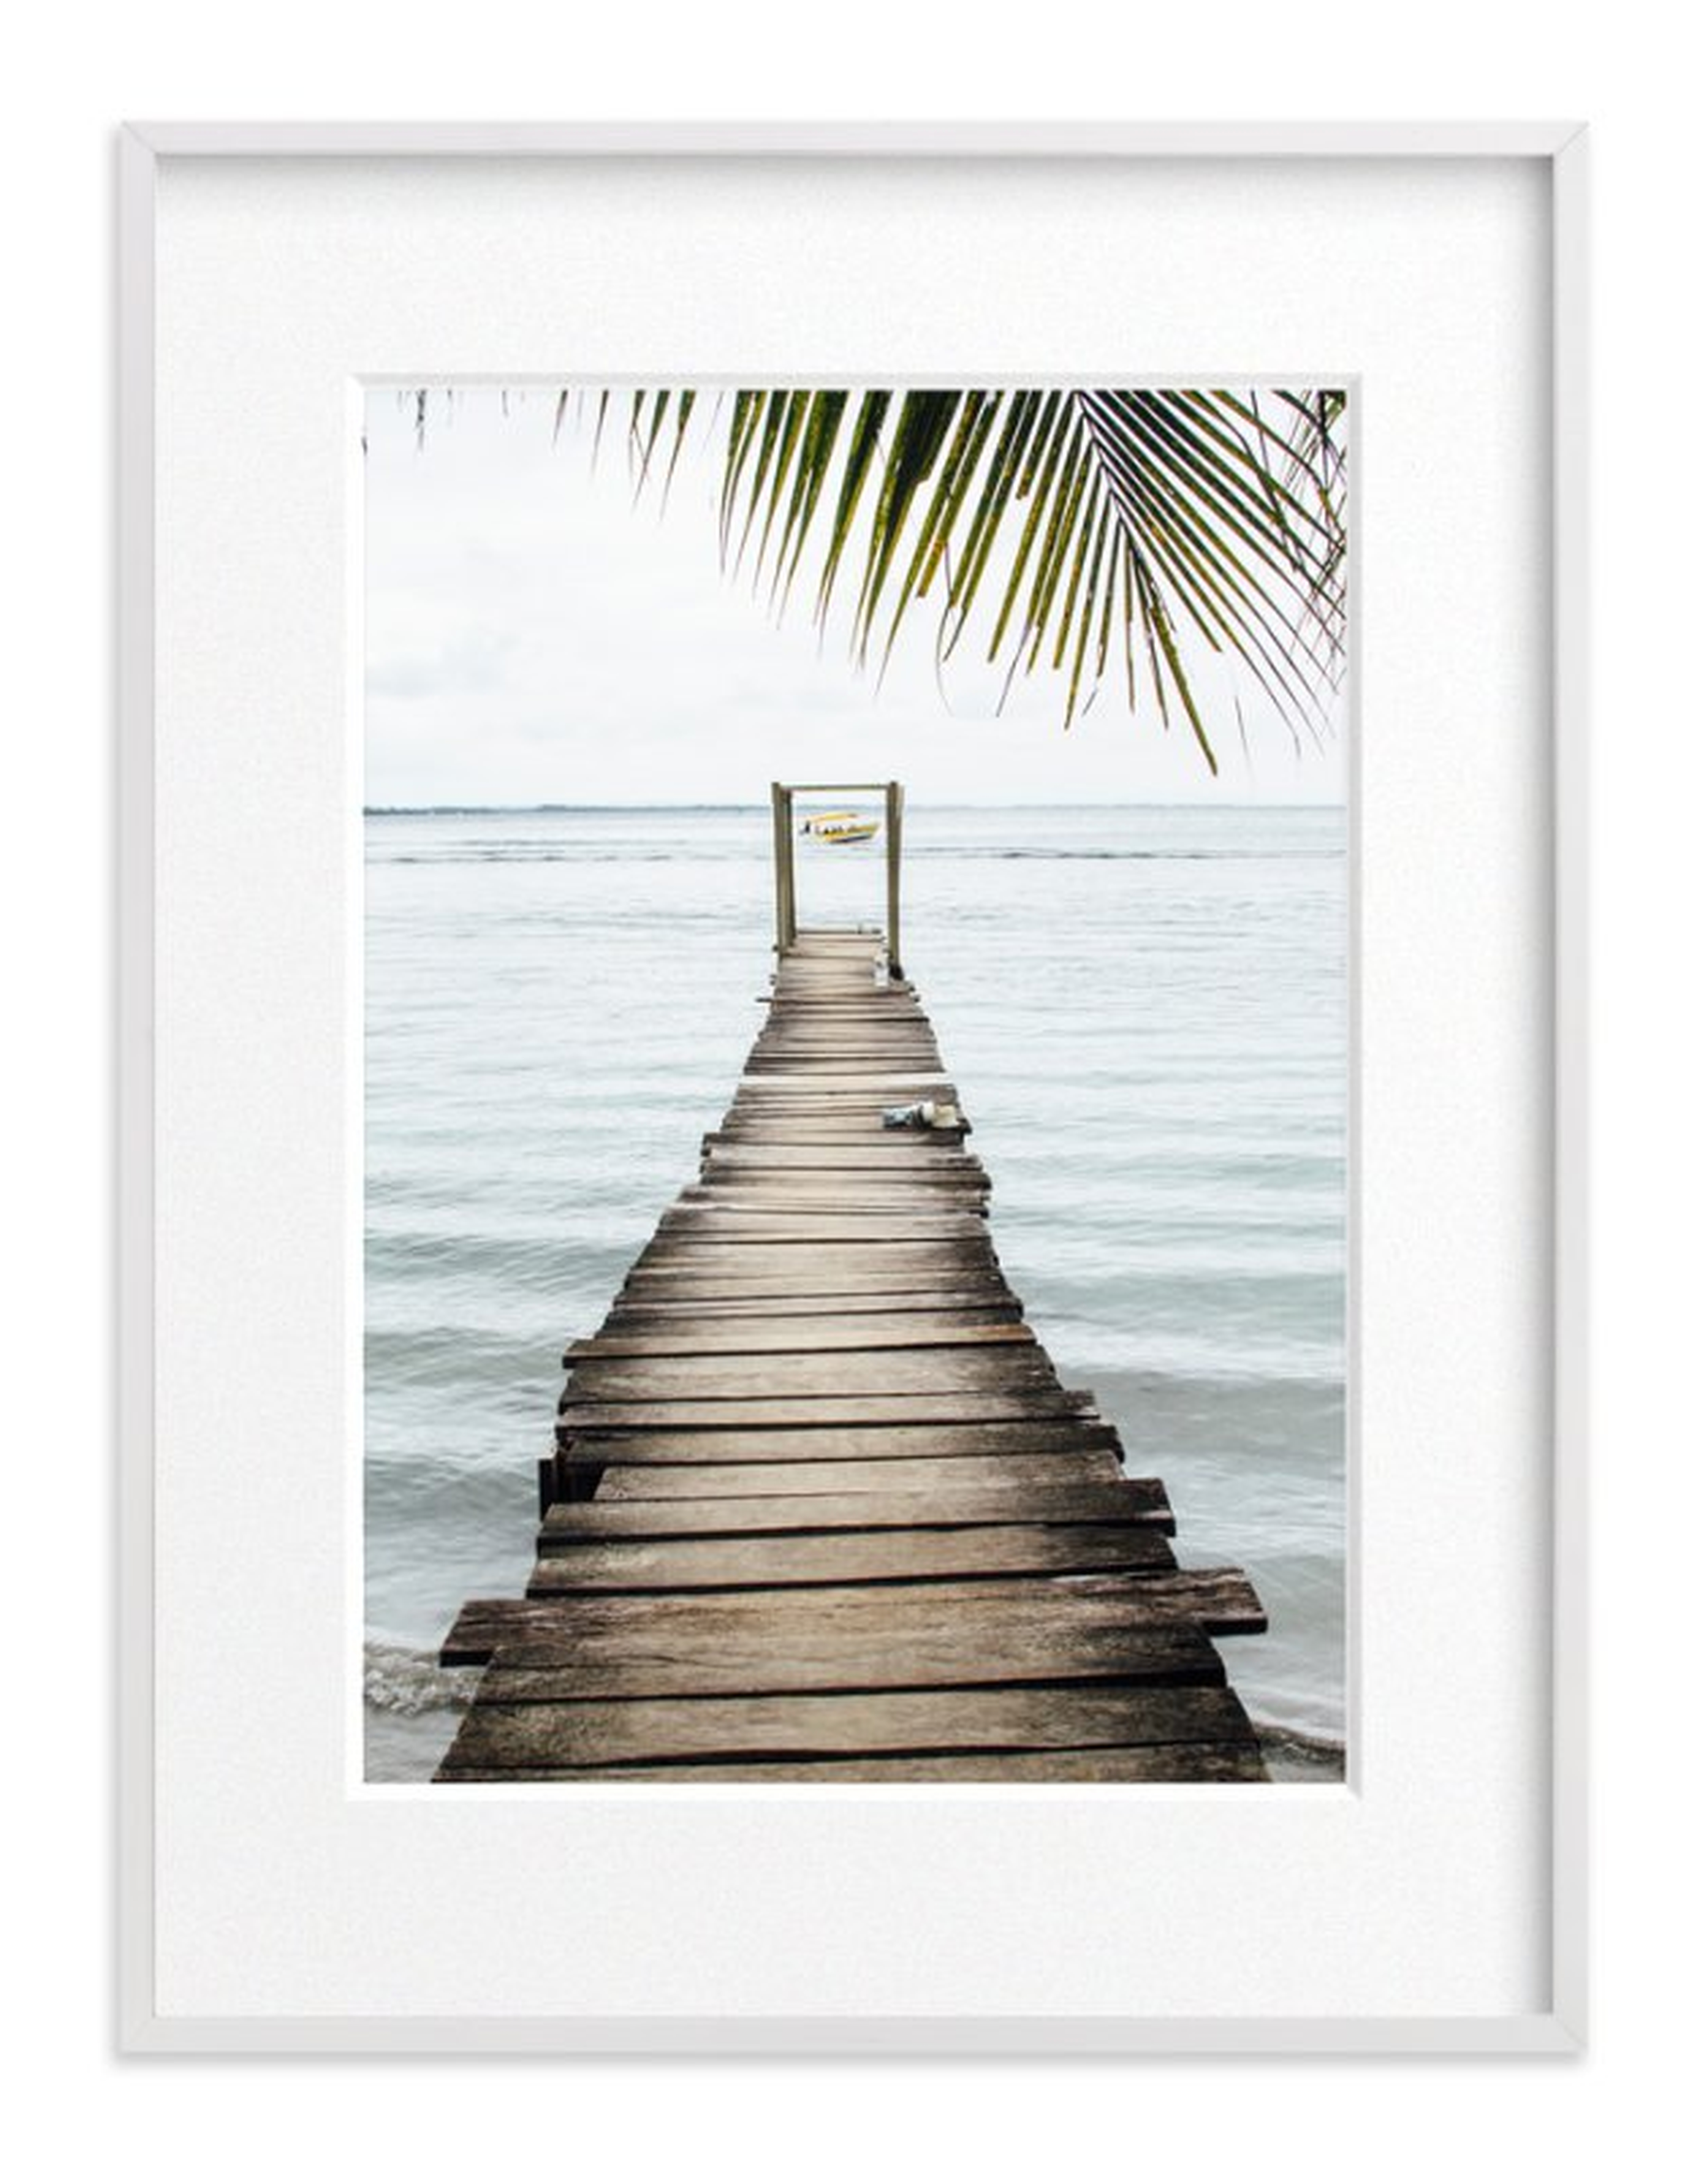 bocas del toro, framed art print, matted with white wood frame, 30x40 - Minted